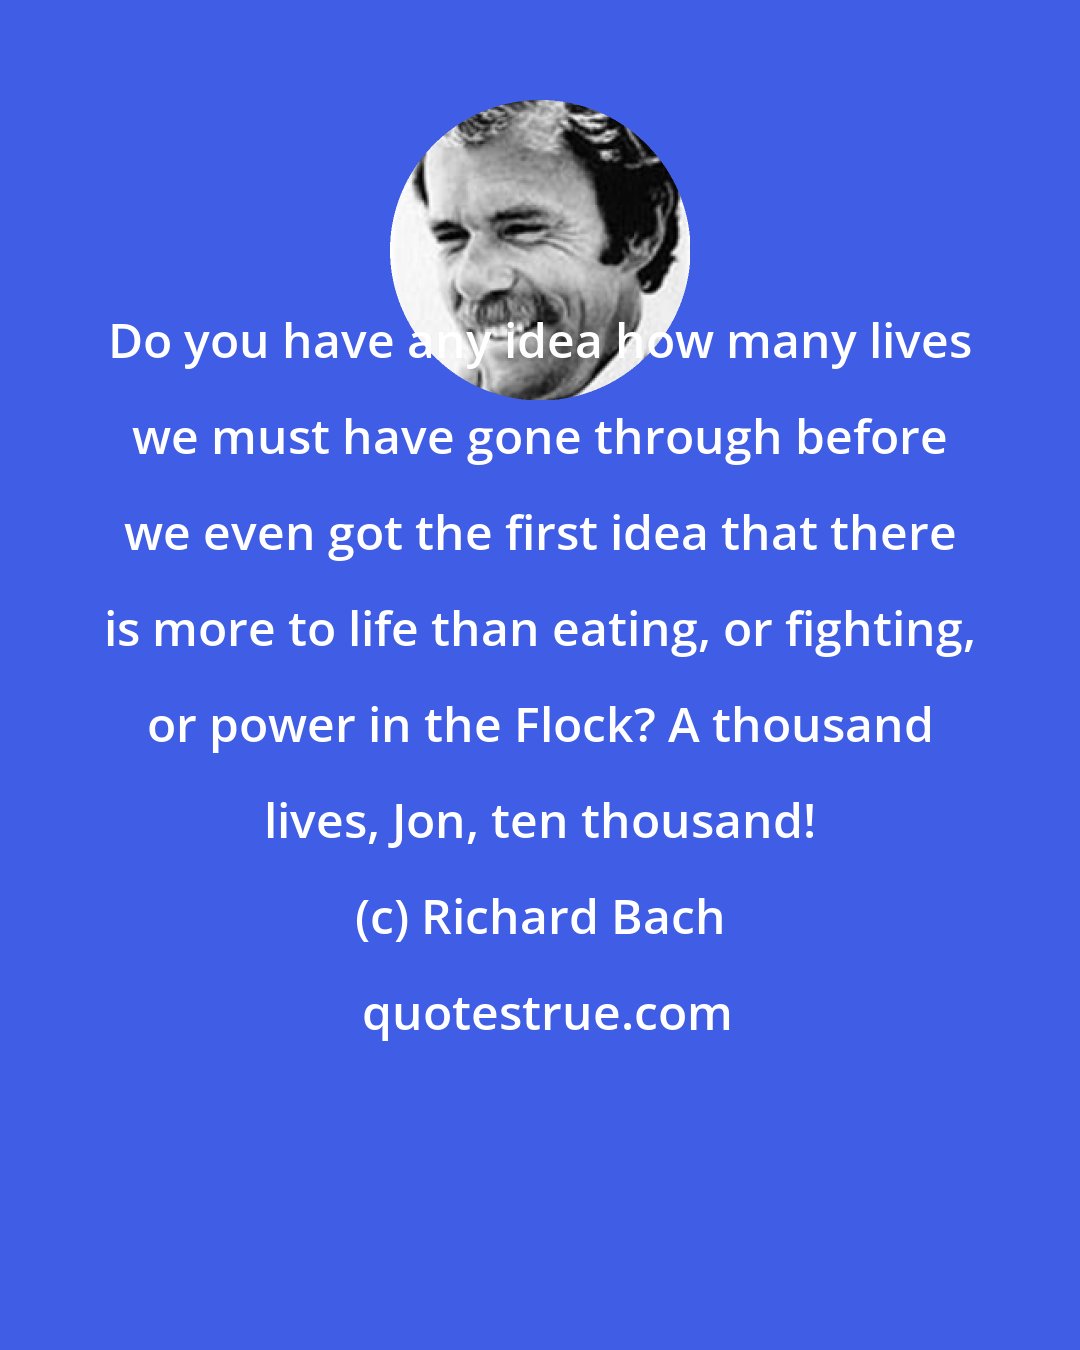 Richard Bach: Do you have any idea how many lives we must have gone through before we even got the first idea that there is more to life than eating, or fighting, or power in the Flock? A thousand lives, Jon, ten thousand!